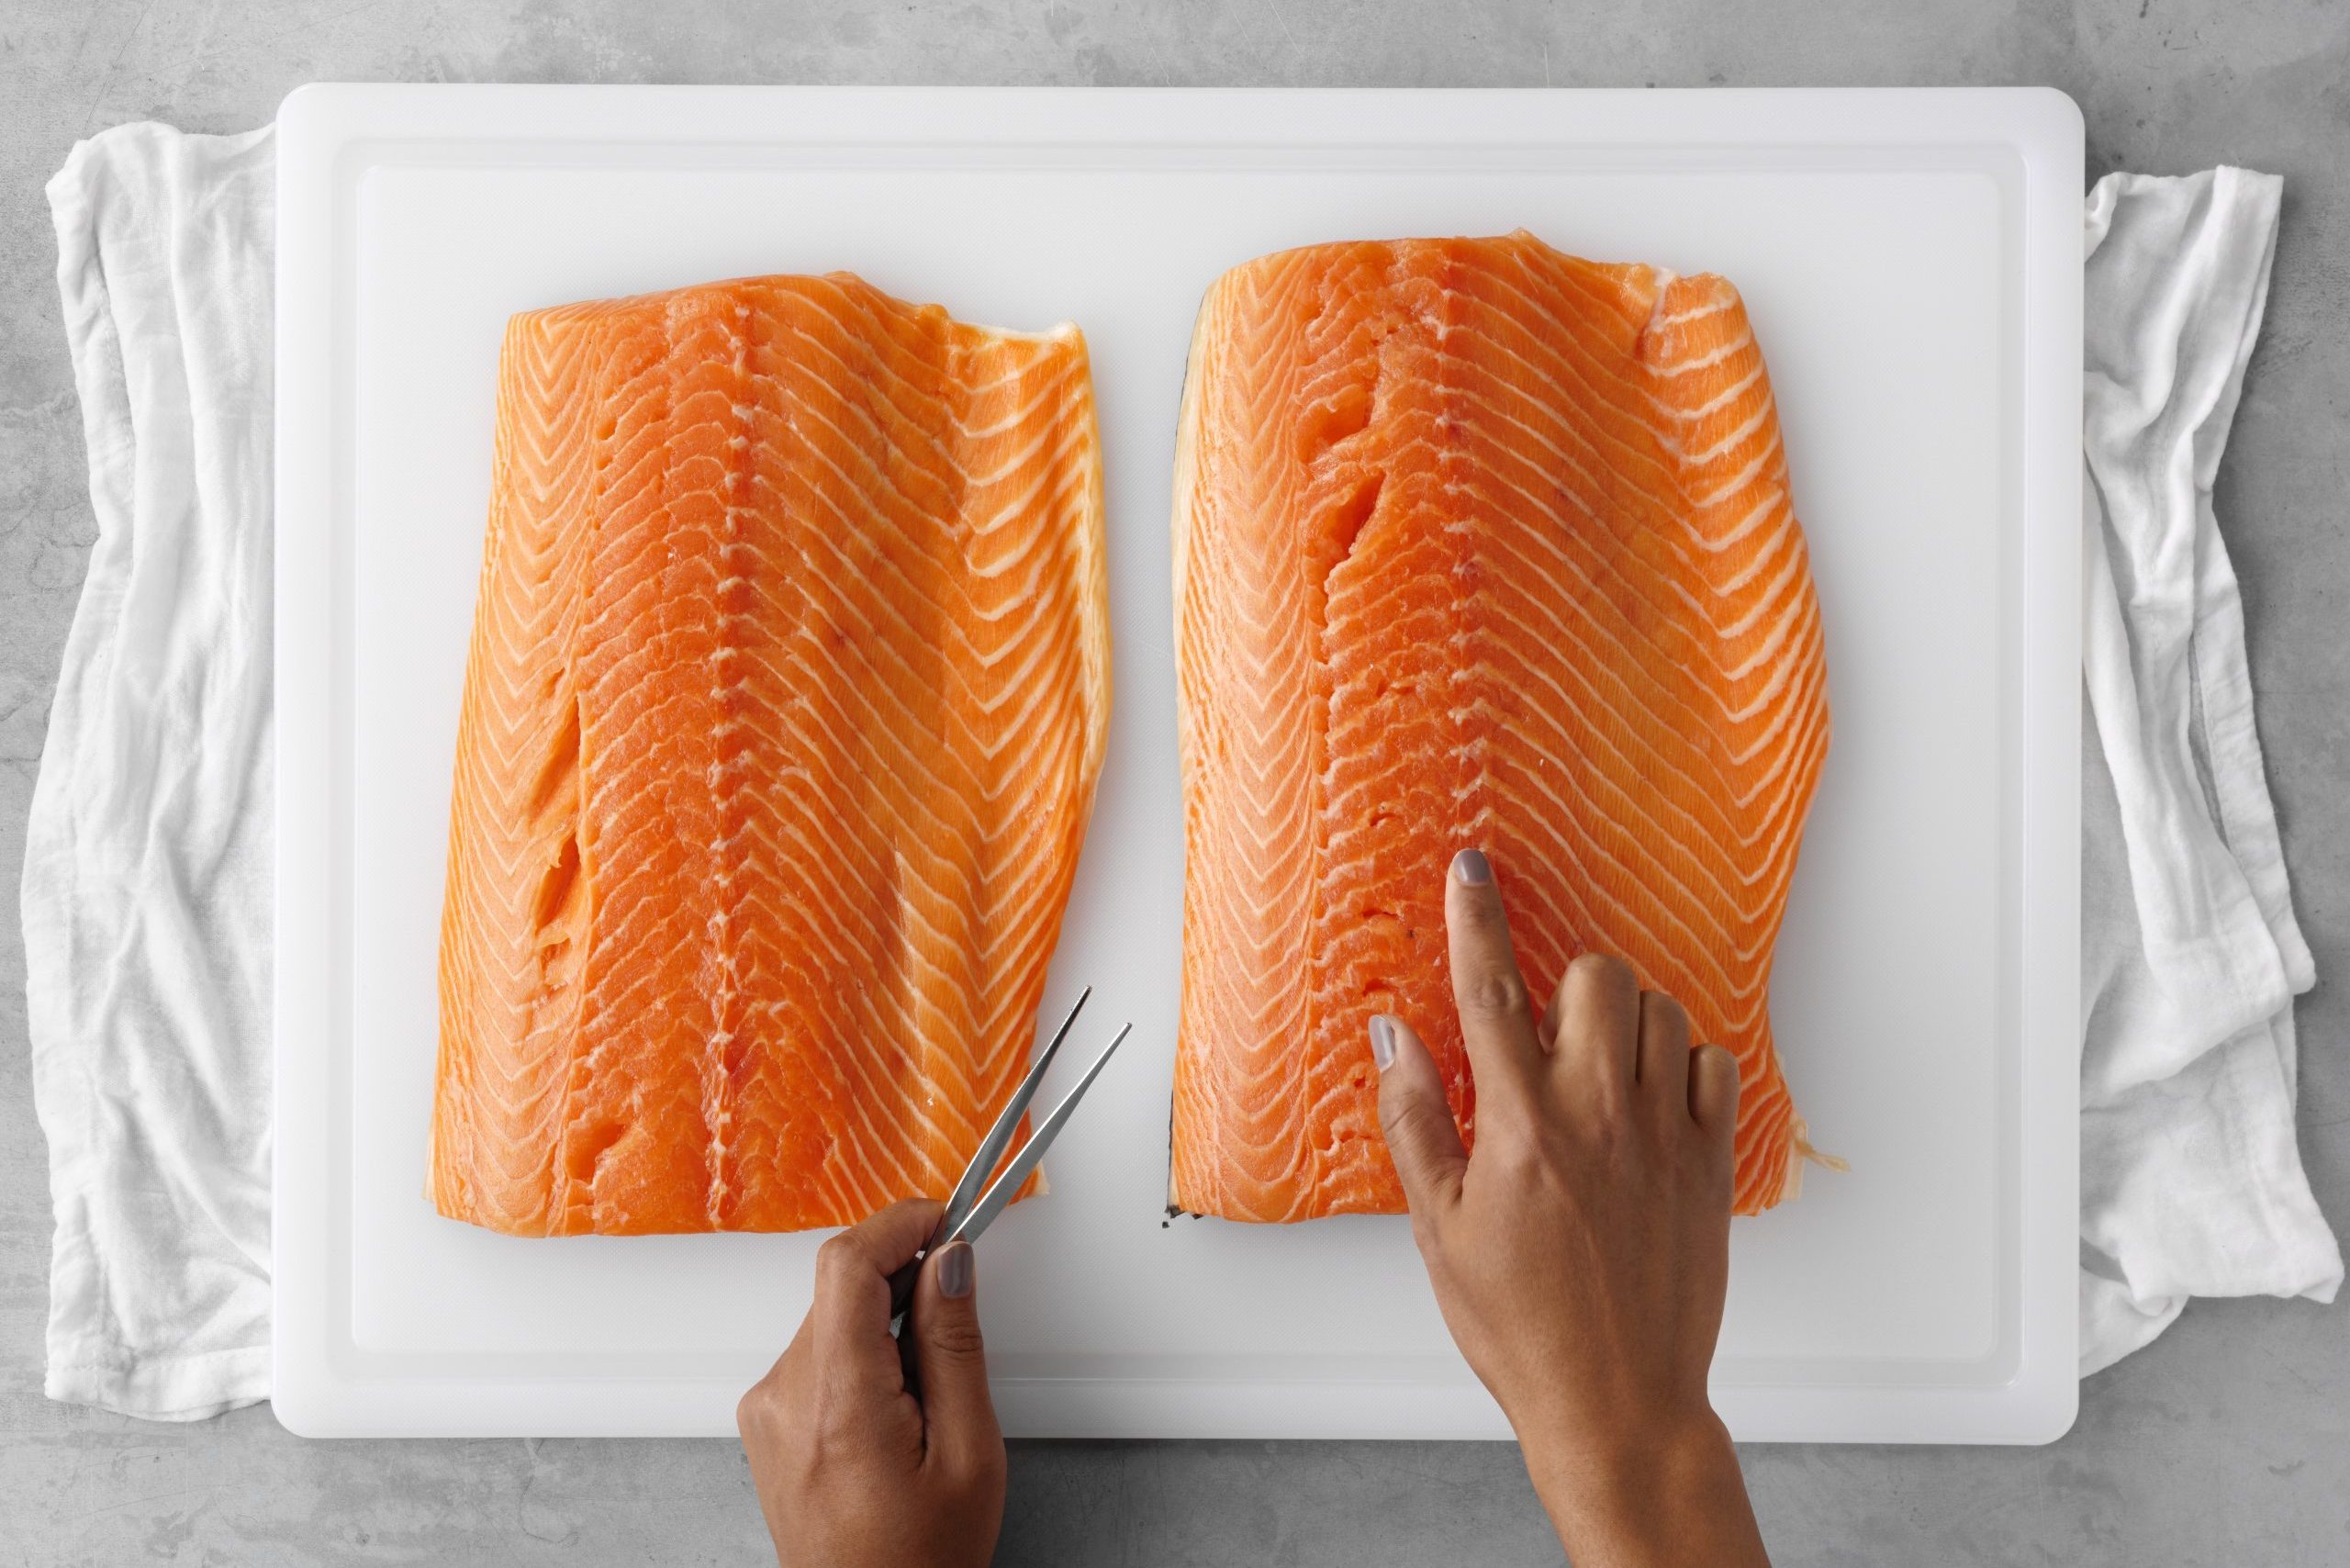 Remove large pin bones from salmon